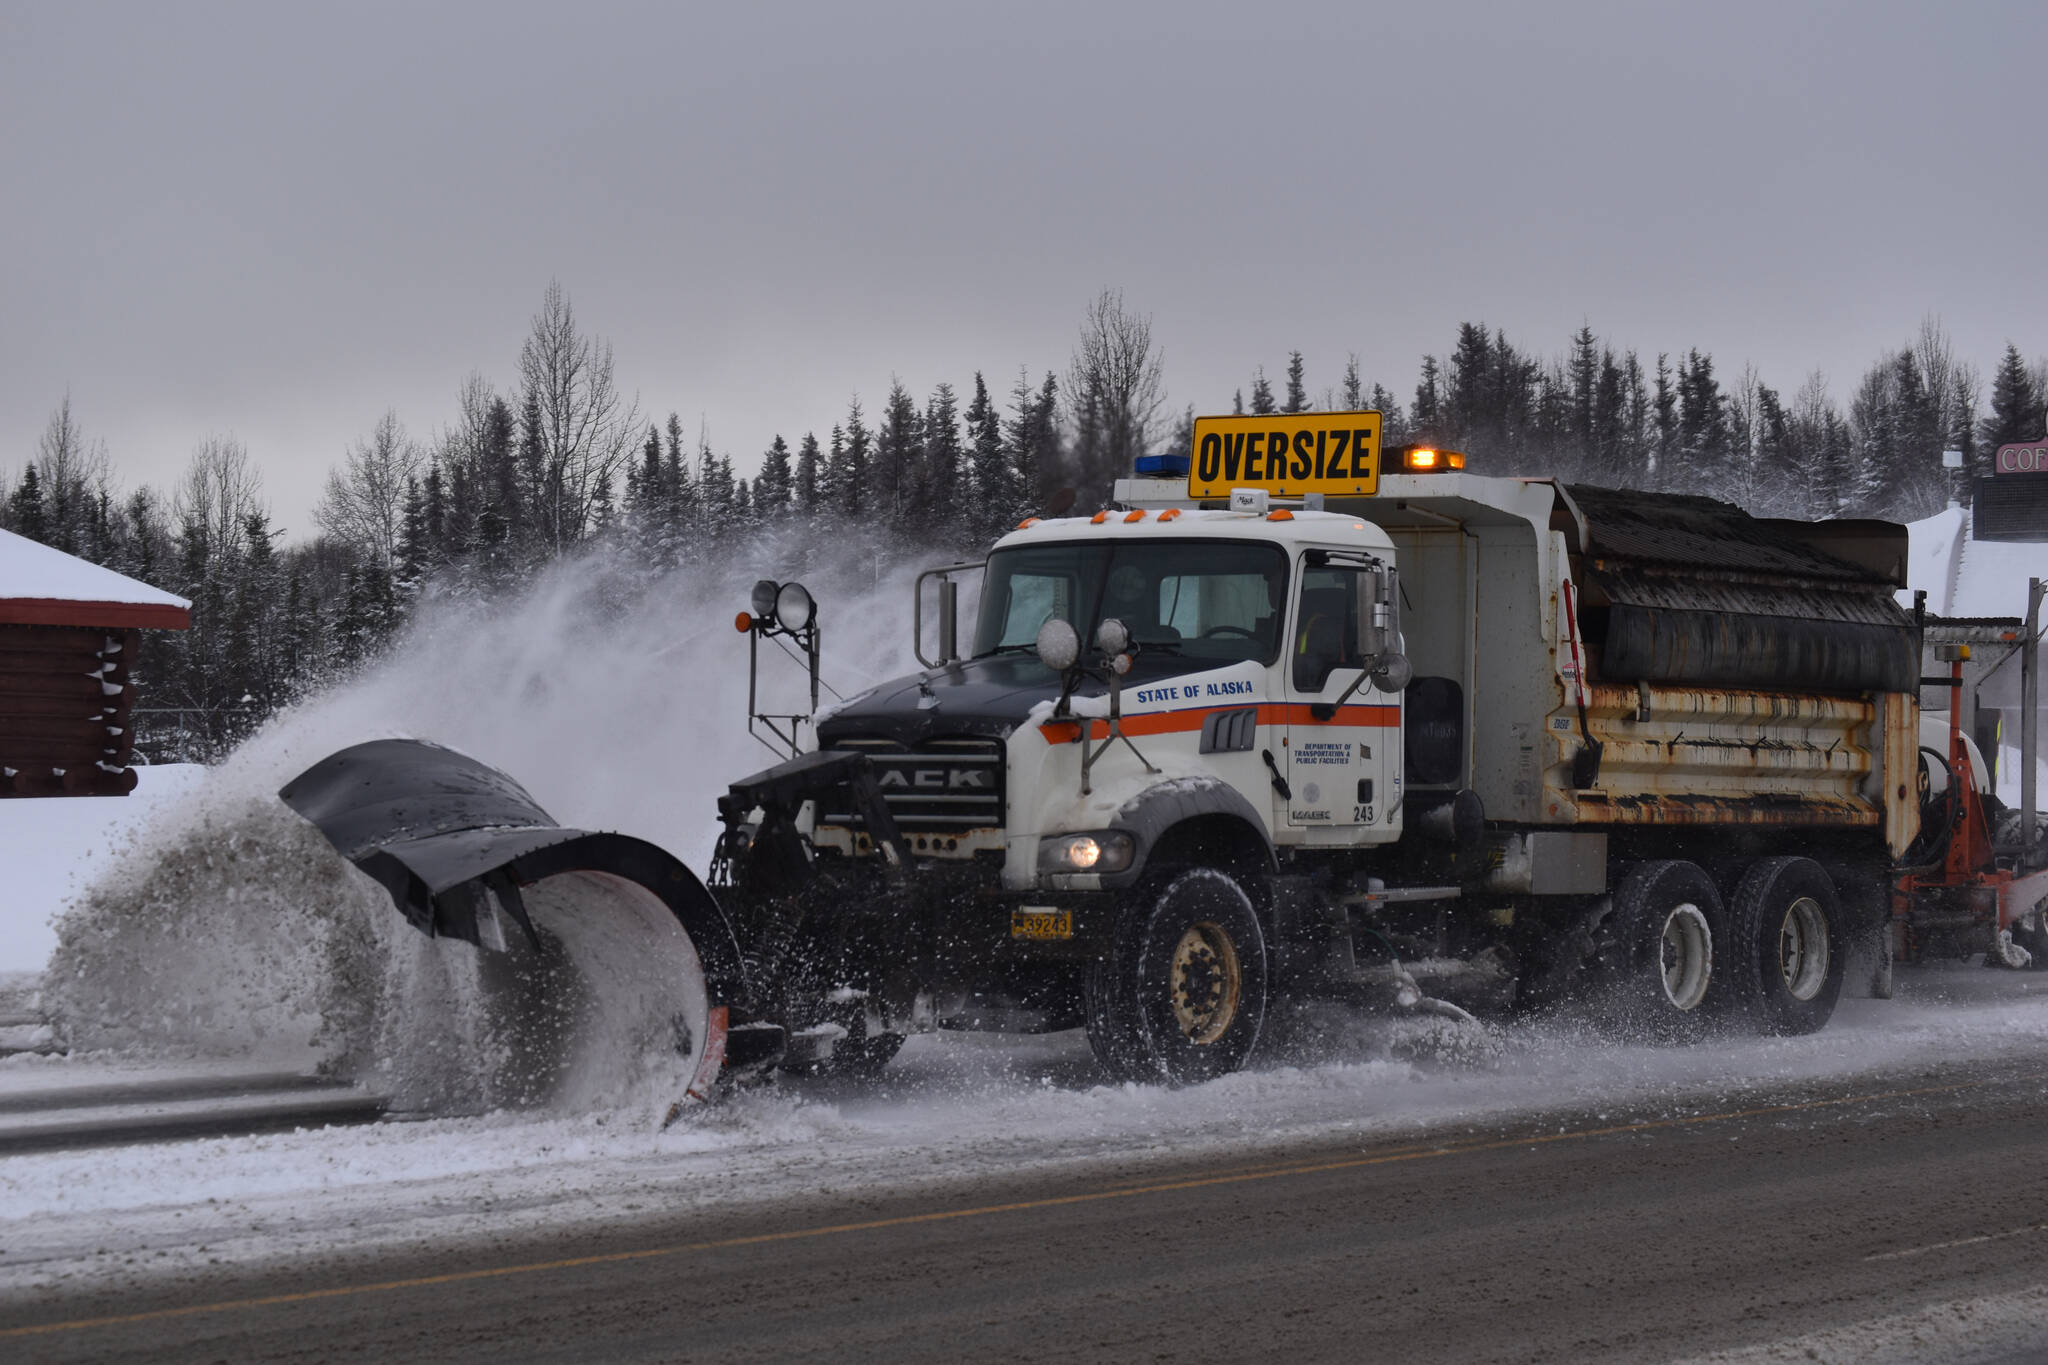 A state plow truck clears snow from the Kenai Spur Highway on Wednesday, Nov. 2, 2022, in Kenai, Alaska. (Jake Dye/Peninsula Clarion)